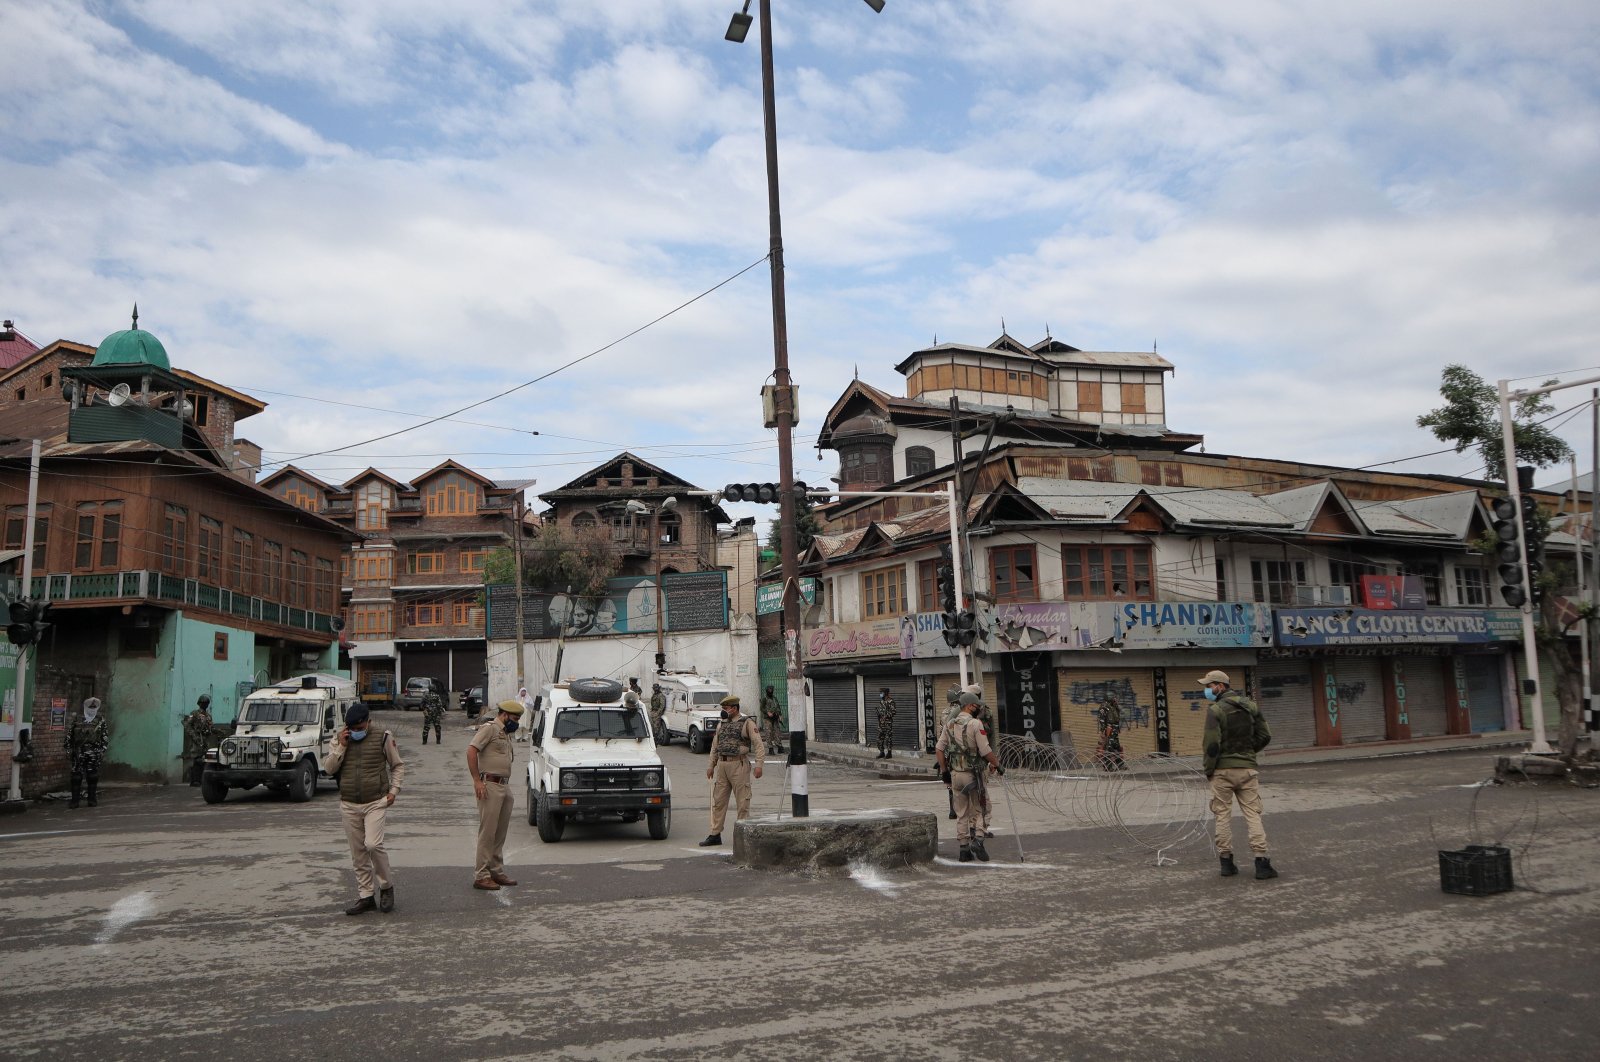 Indian paramilitary forces stand on alert during COVID-19 restrictions on the eve of Ramadan Bayram, also known as Eid al-Fitr, in Srinagar, India-controlled Kashmir, May 13, 2021. (Photo by Getty Images)